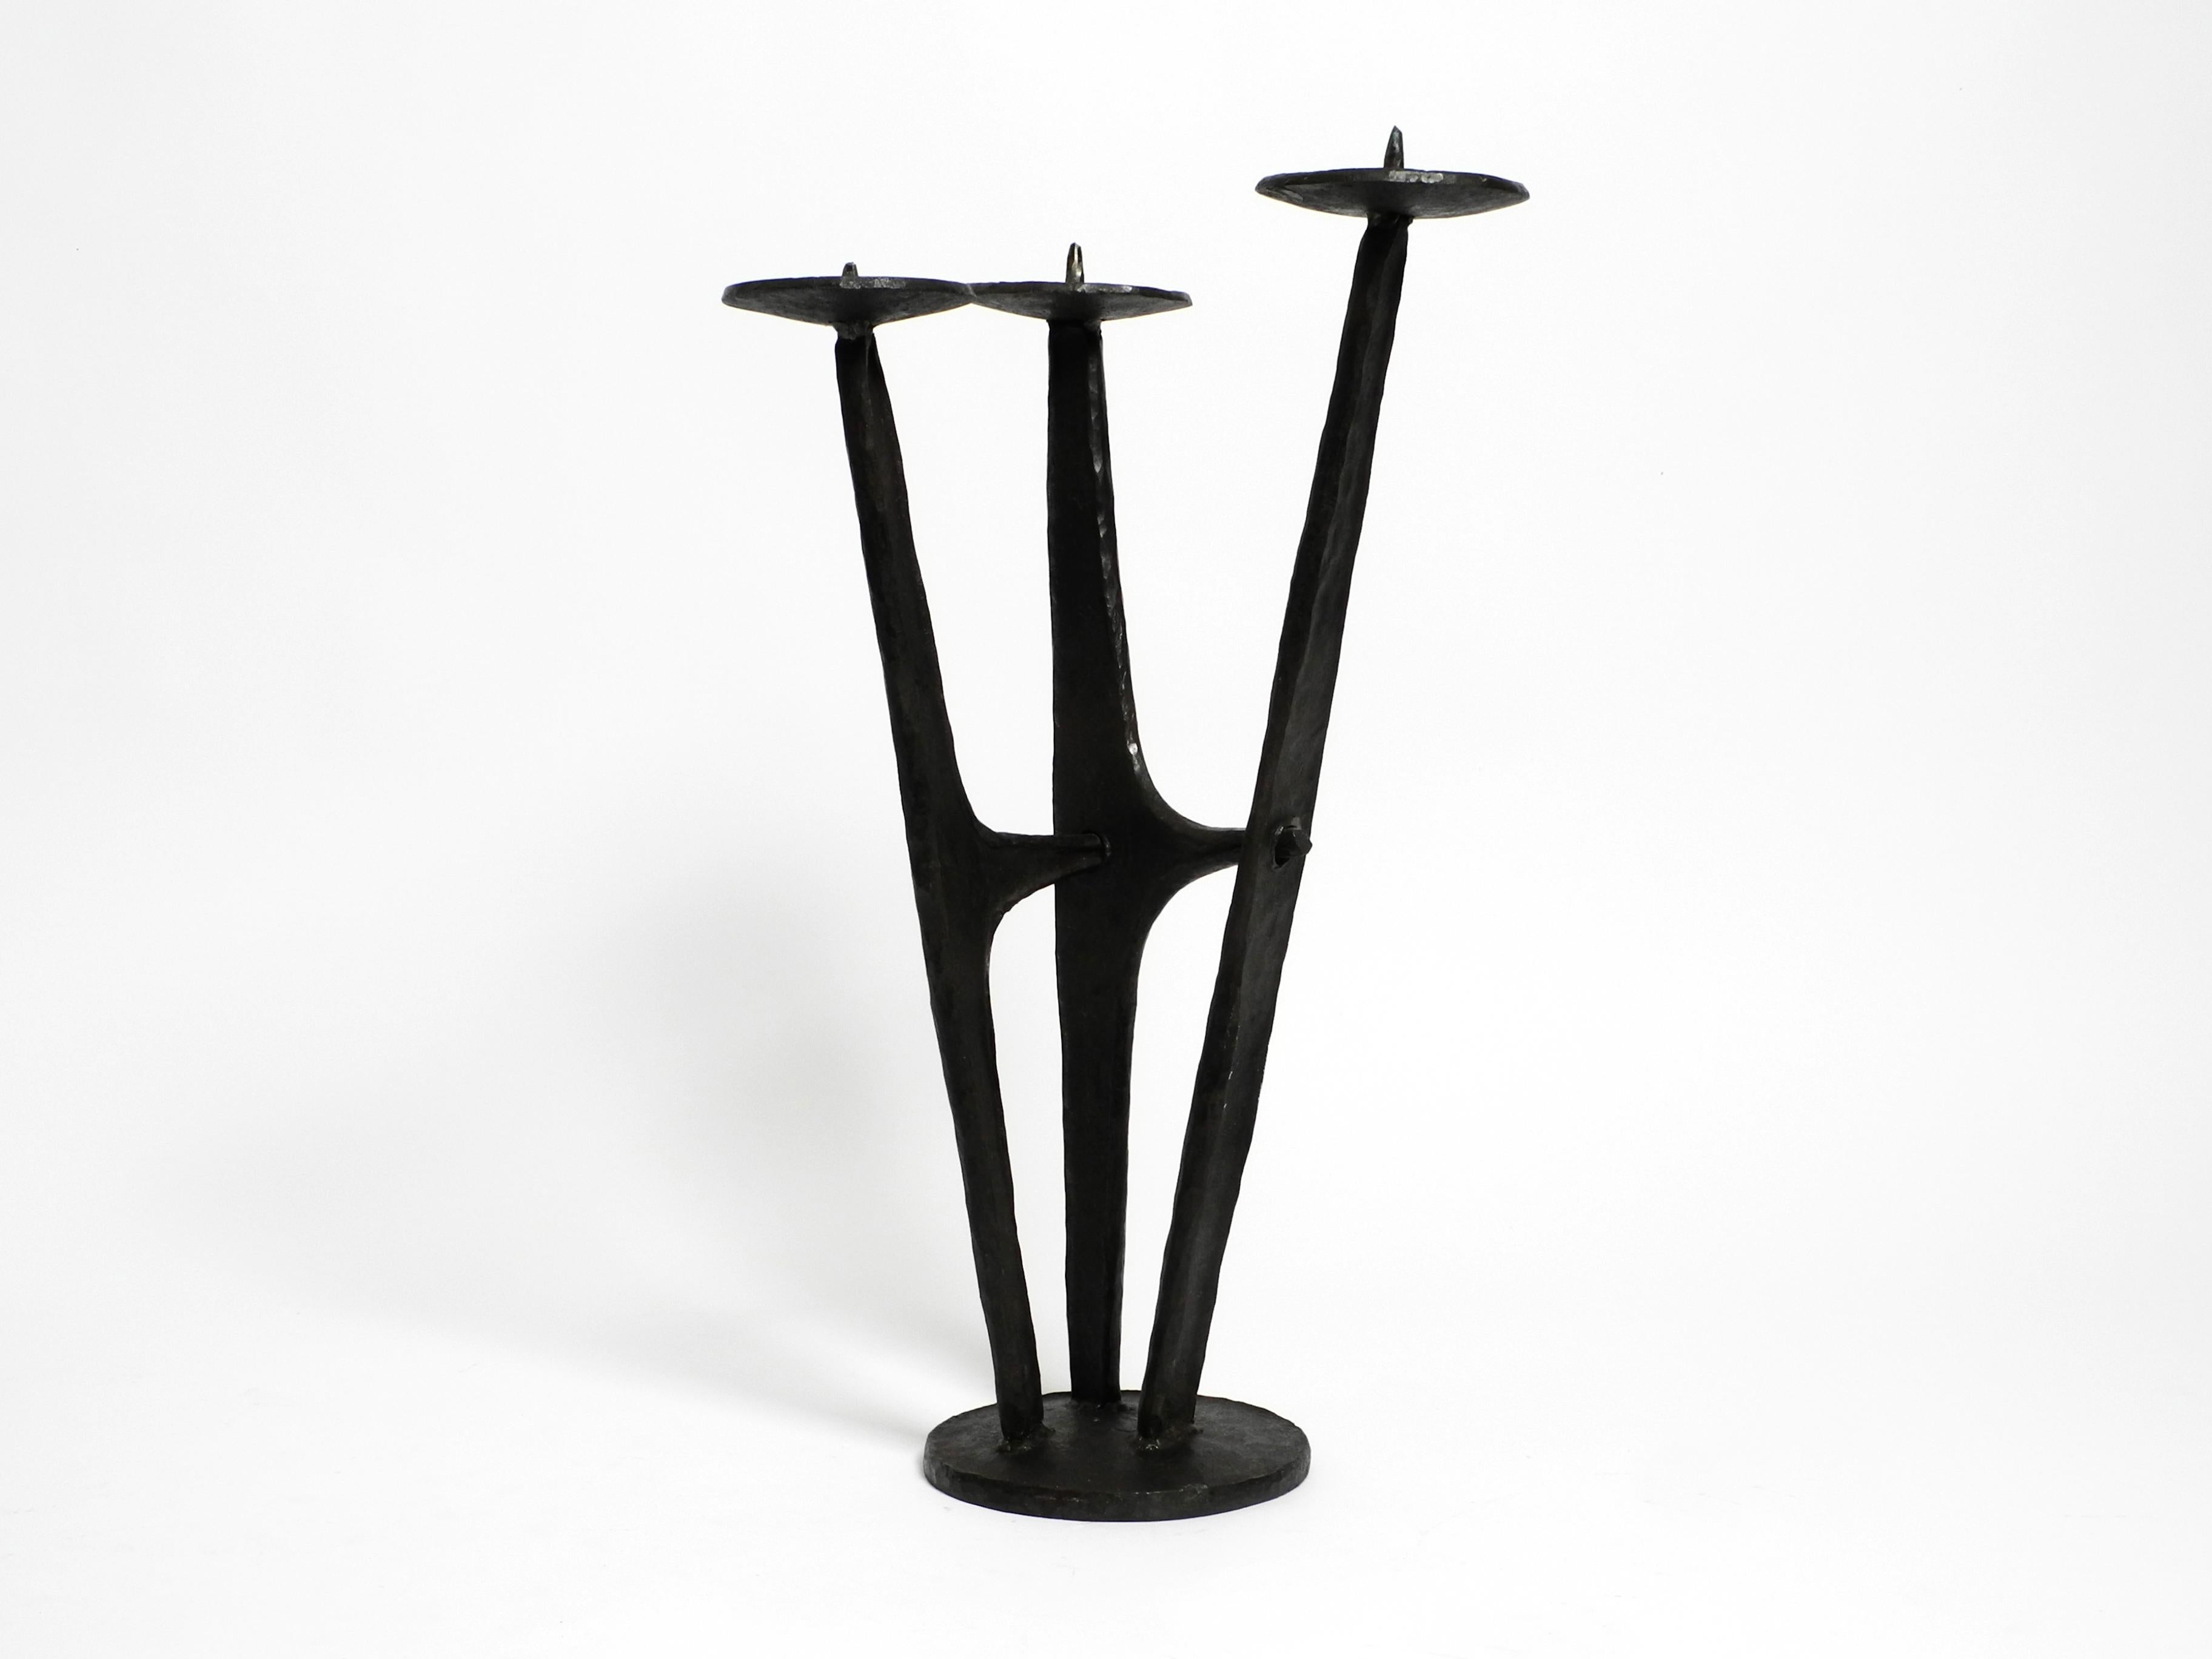 Extraordinary large, heavy 1950s floor candlestick made of wrought iron in a typical Mid Century Streamline design. Beautiful rare decoration for all living areas.
The heavy design piece wit a height of  65cm without candles and a weight of approx.